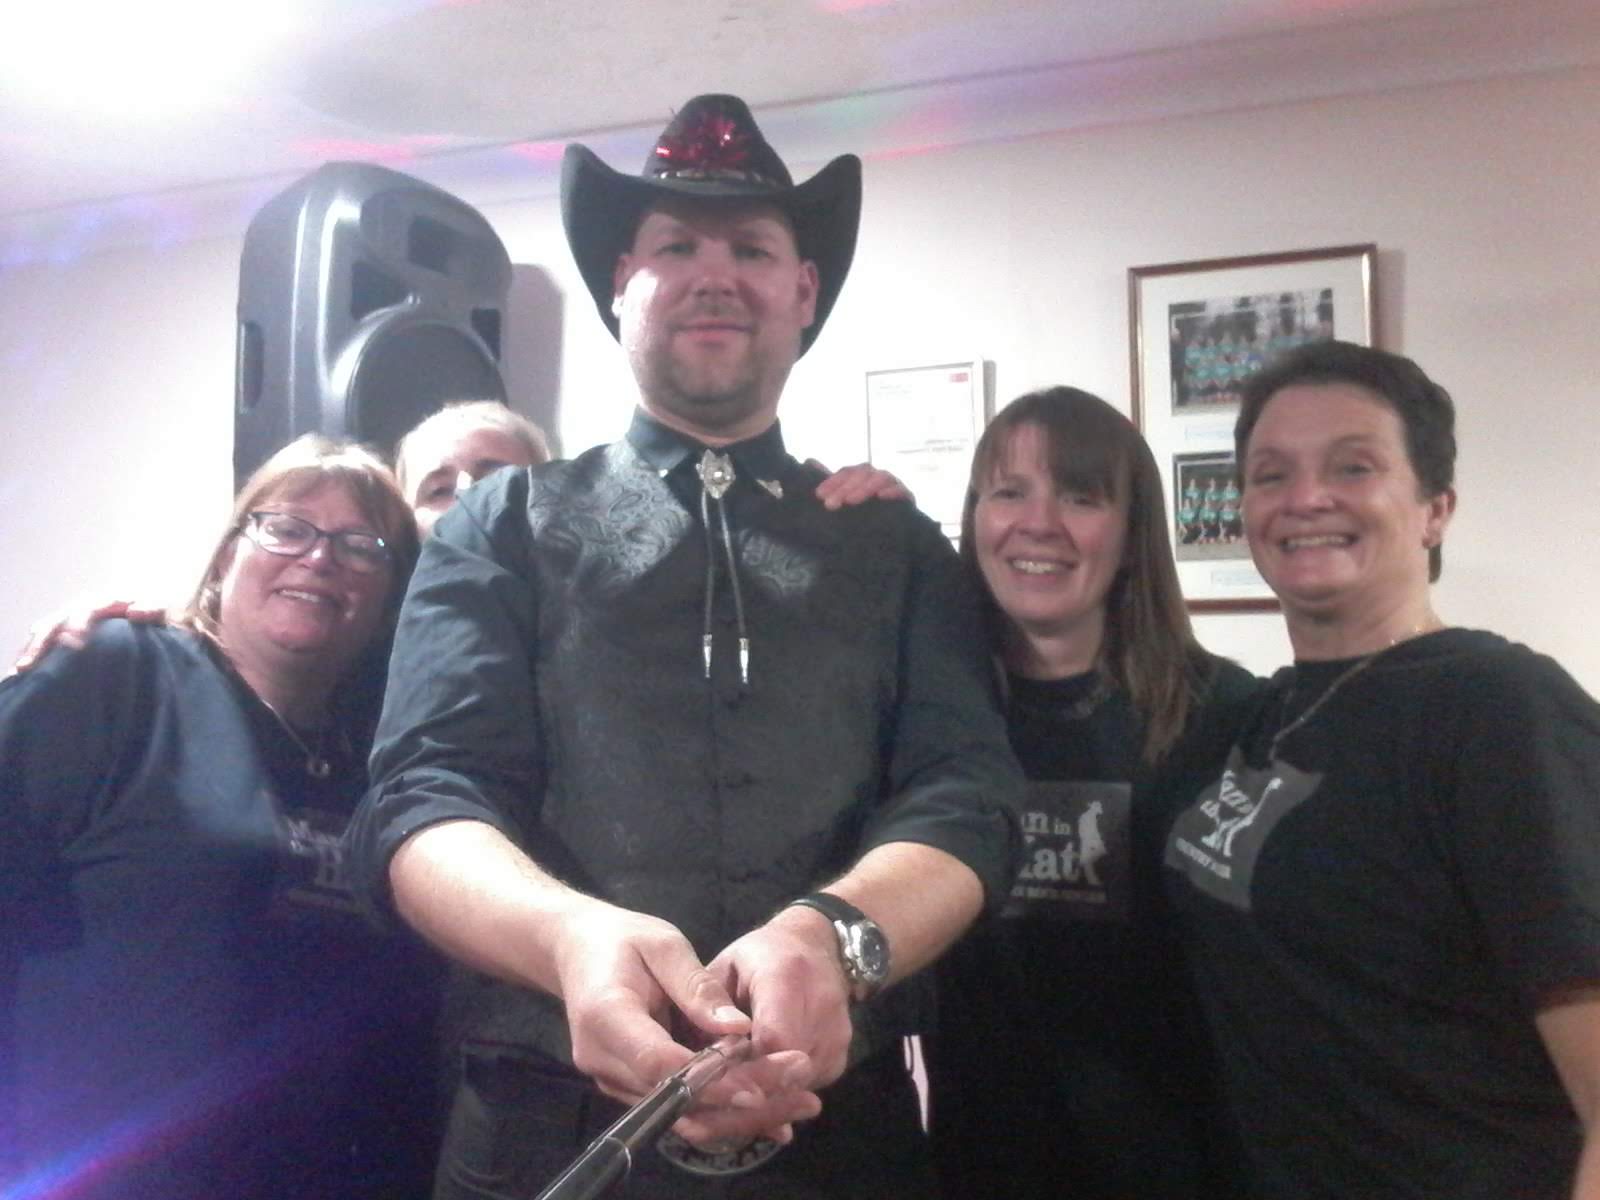 Man in the Hat & The Hatettes! Fram Sports Club - Dec 2019